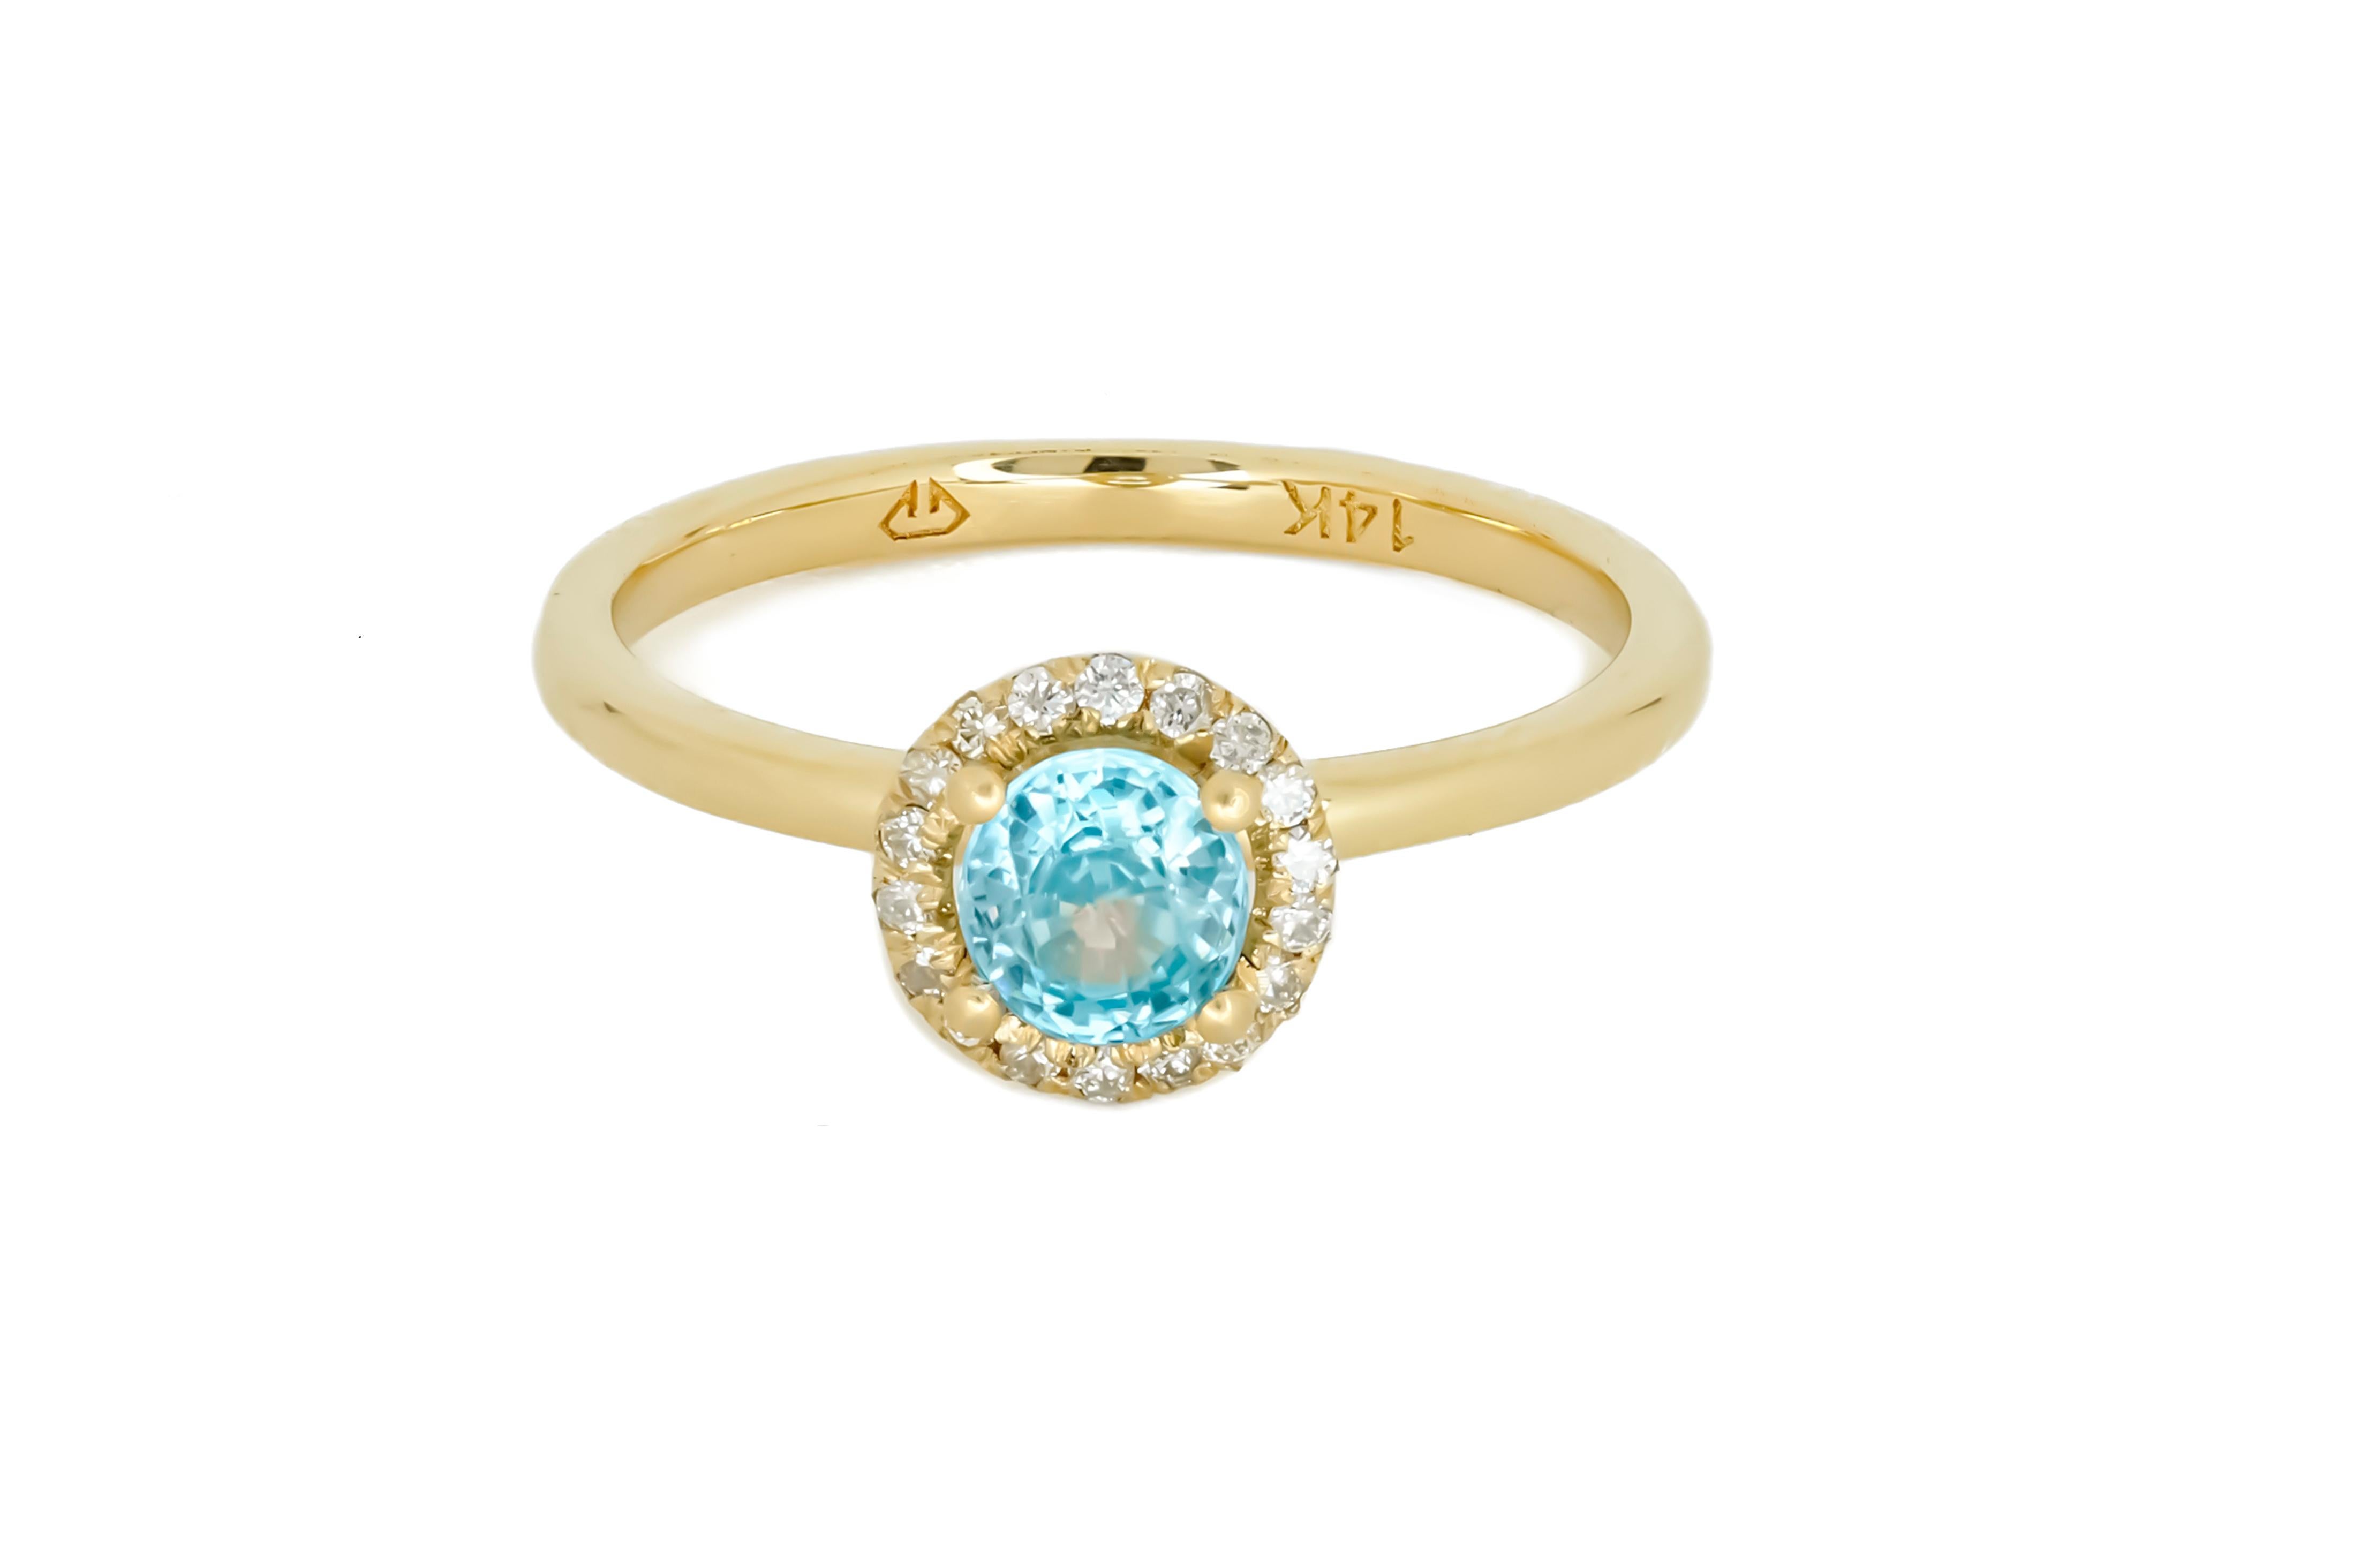 Halo topaz Ring with Diamonds in 14 Karat Gold. 
Topaz gold ring. Topaz engagement ring. Round topaz ring. Everyday topaz ring.

Metal type: Gold
Metal stamp: 14k Gold
Weight: 2 gr - depends from size.

Central gemstone:
Topaz round shape, blue